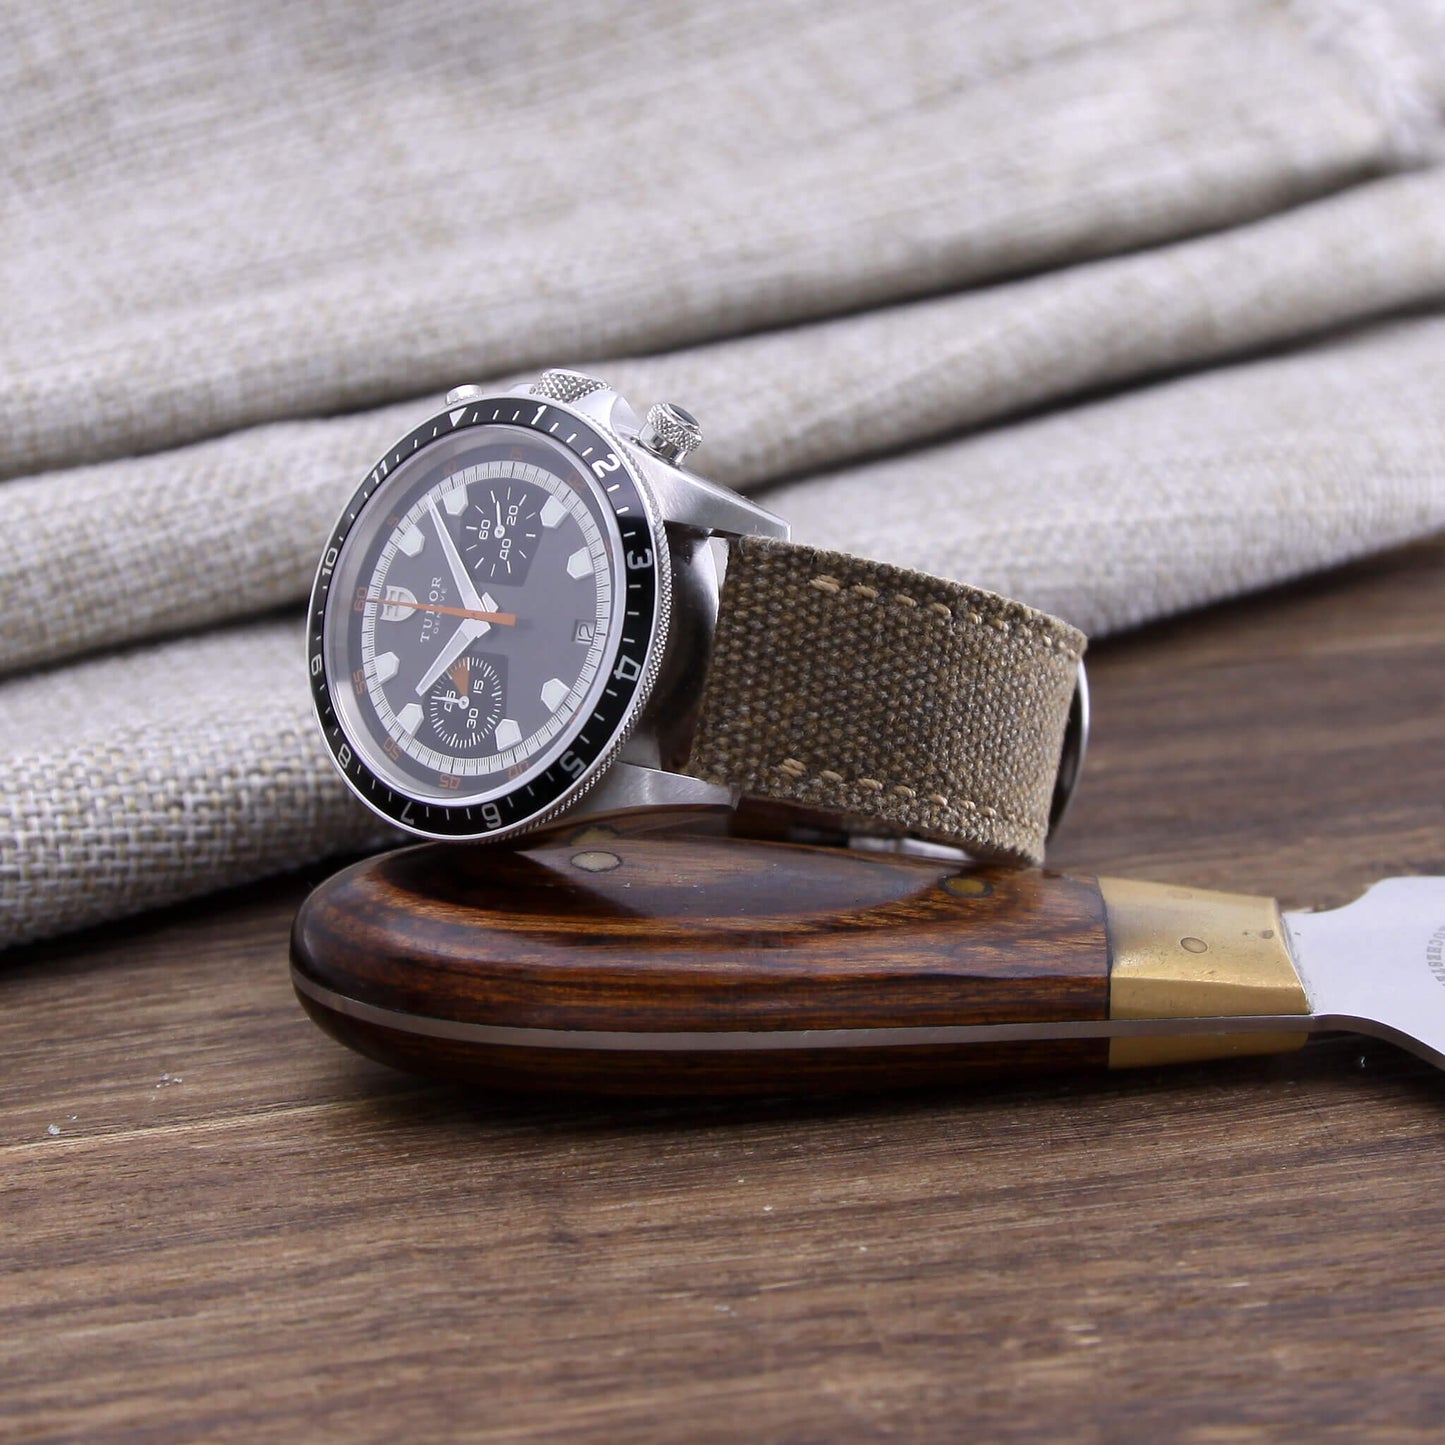 6th View of 2-Piece Full Stitch Leather Watch Strap, made with Rustic Brown Canvas and Italian veg-tanned leather lining, handcrafted by Cozy Handmade